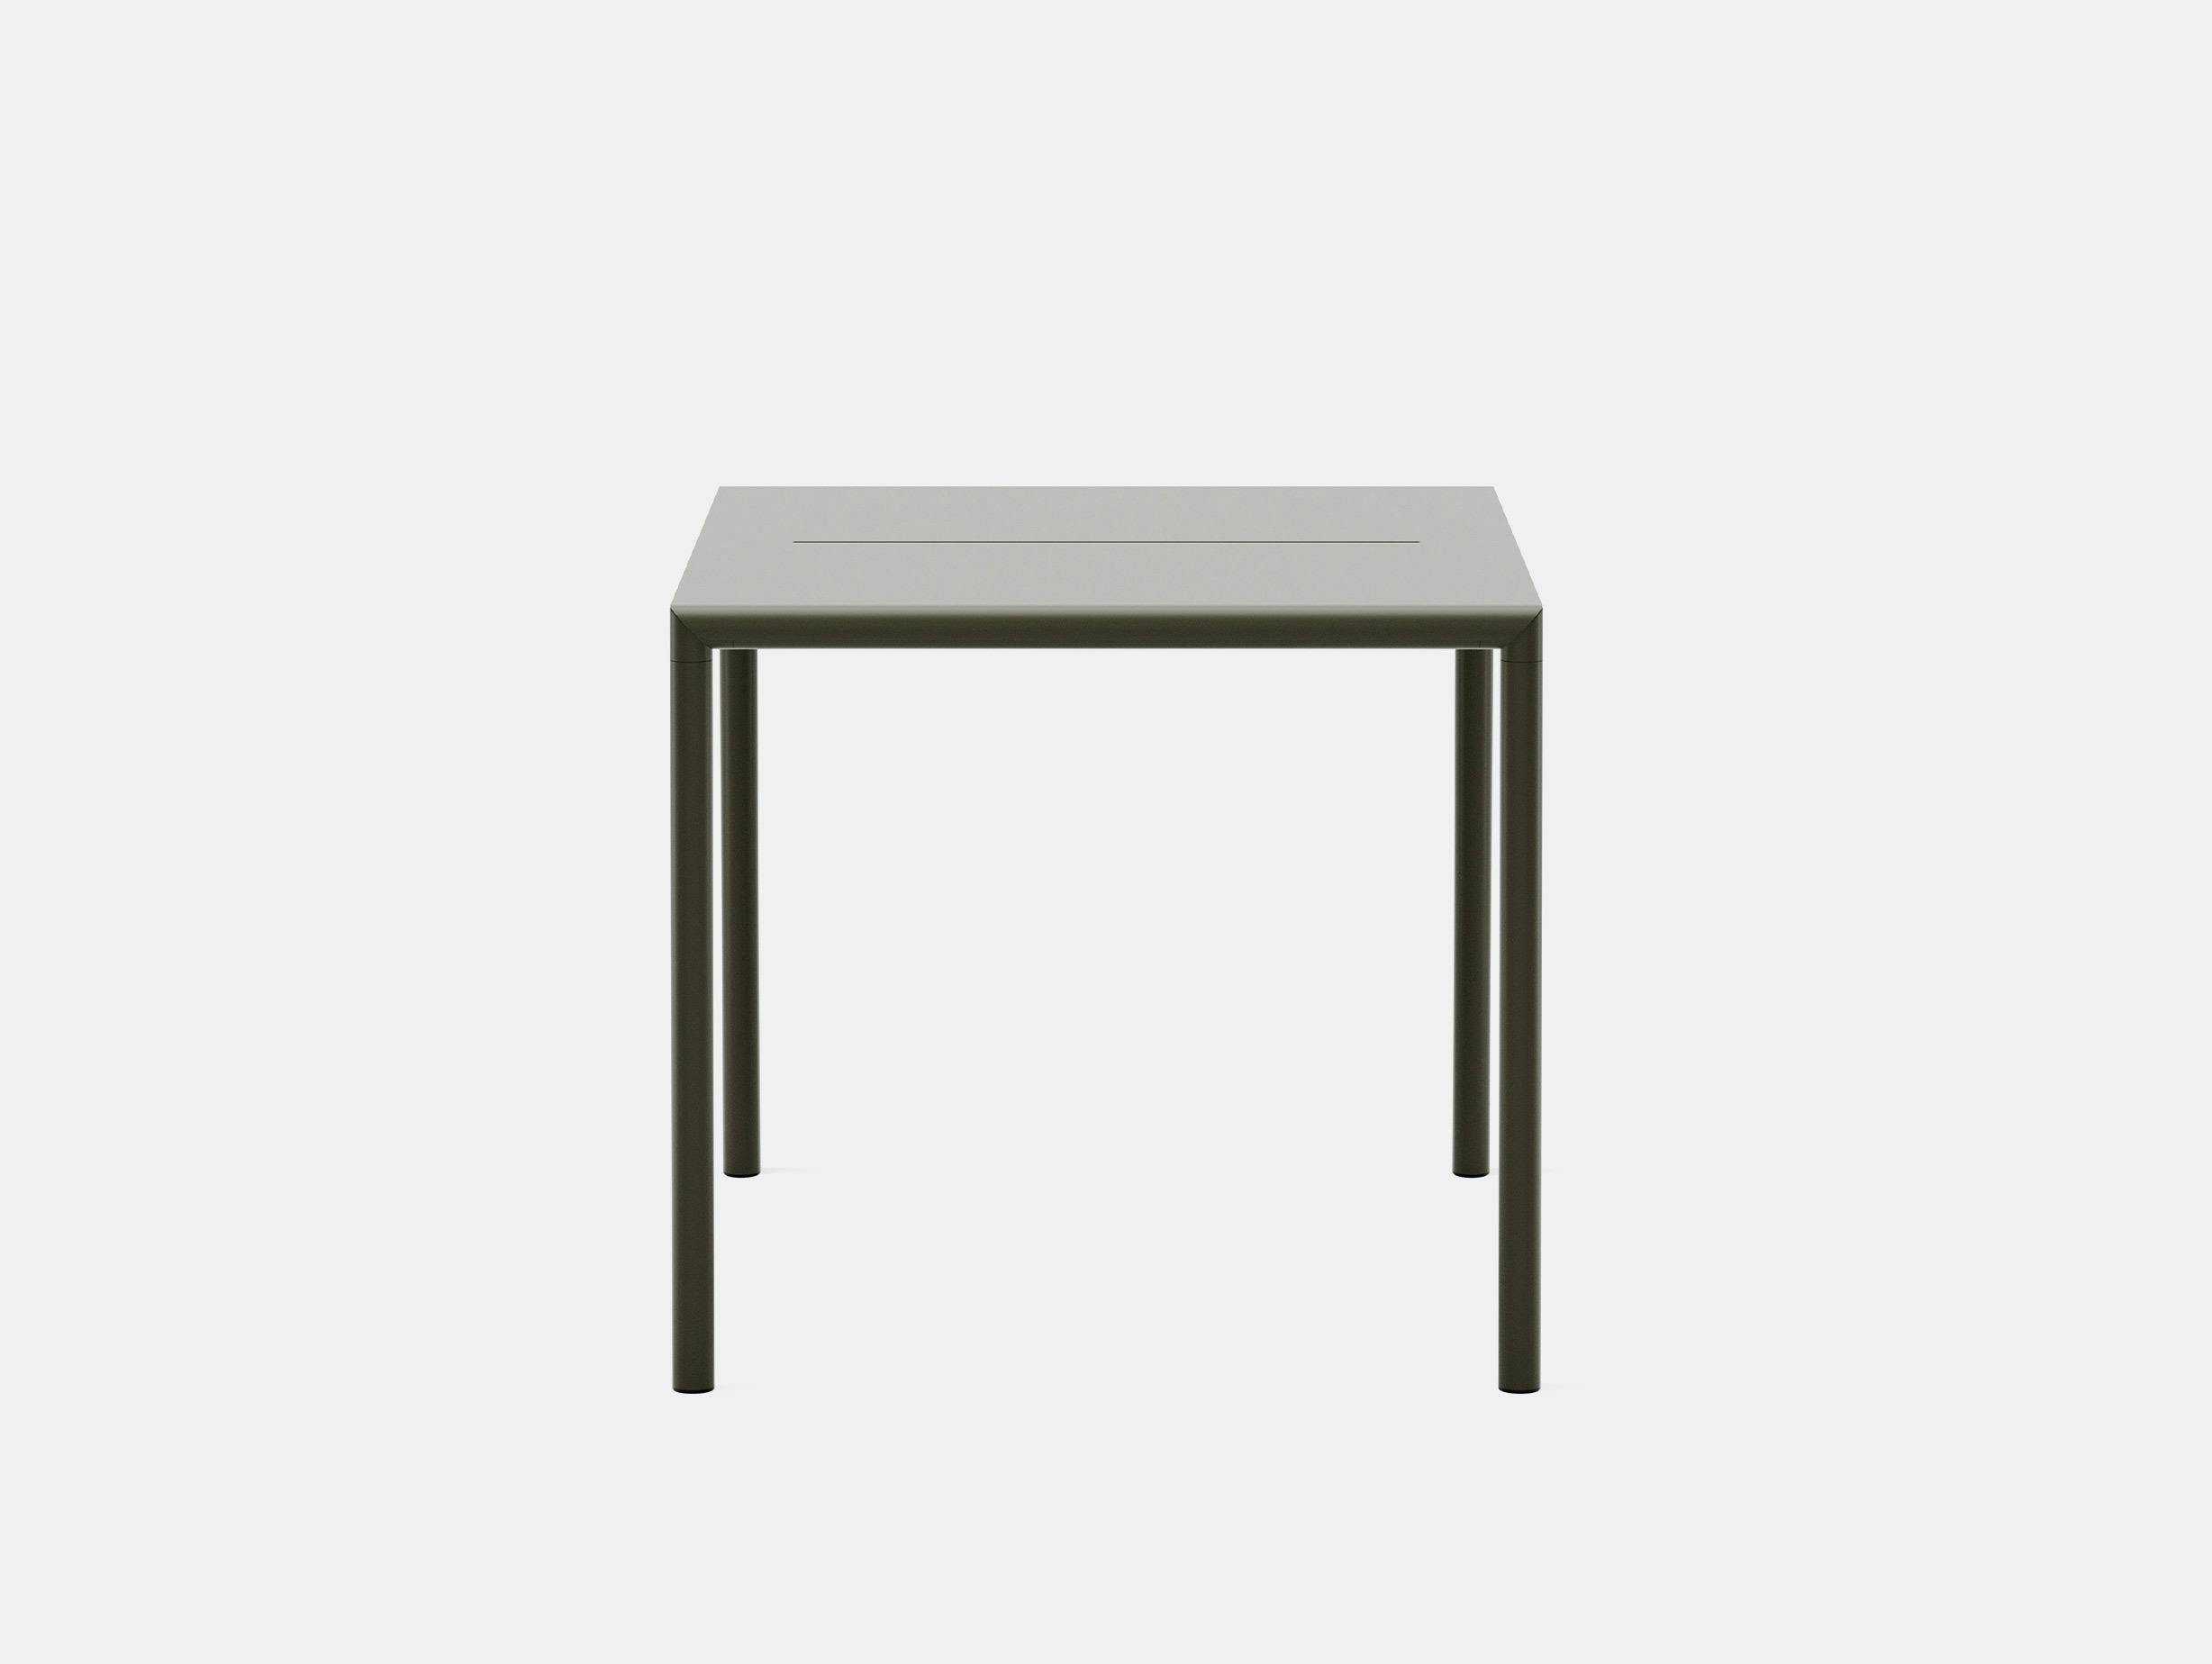 New works hannes fritz may table square dark green2